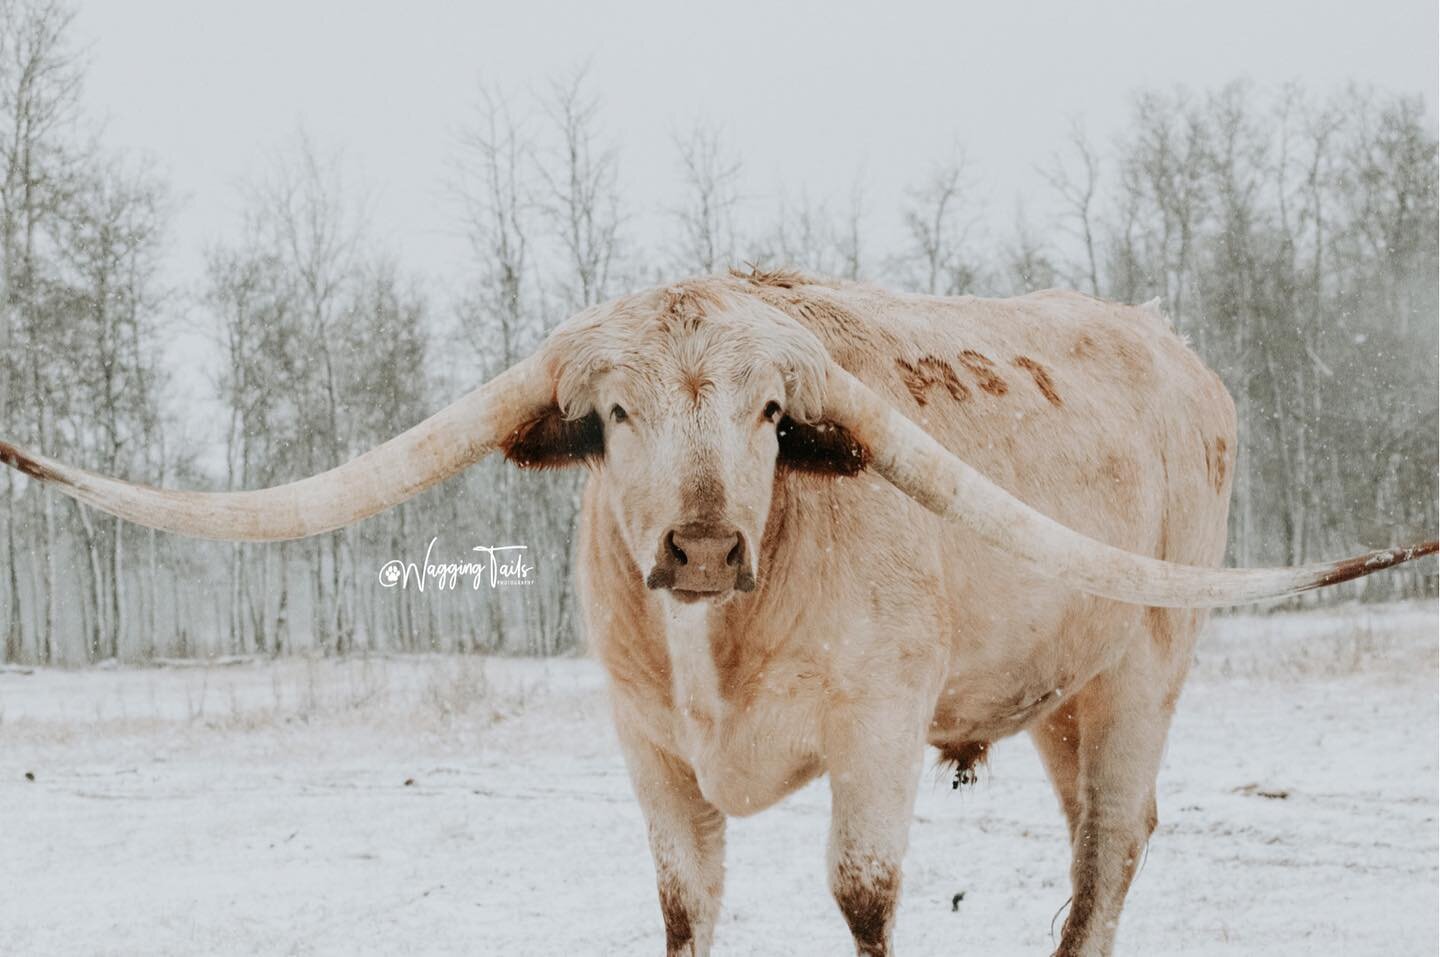 Who doesn&rsquo;t love cows?! 🐮 I had so much fun photographing the longhorns at MSW Farms! I can&rsquo;t wait to go there again when it&rsquo;s actually not snowing so I can get more beautiful photos 😍 I love photographing farm life and cattle 🥰